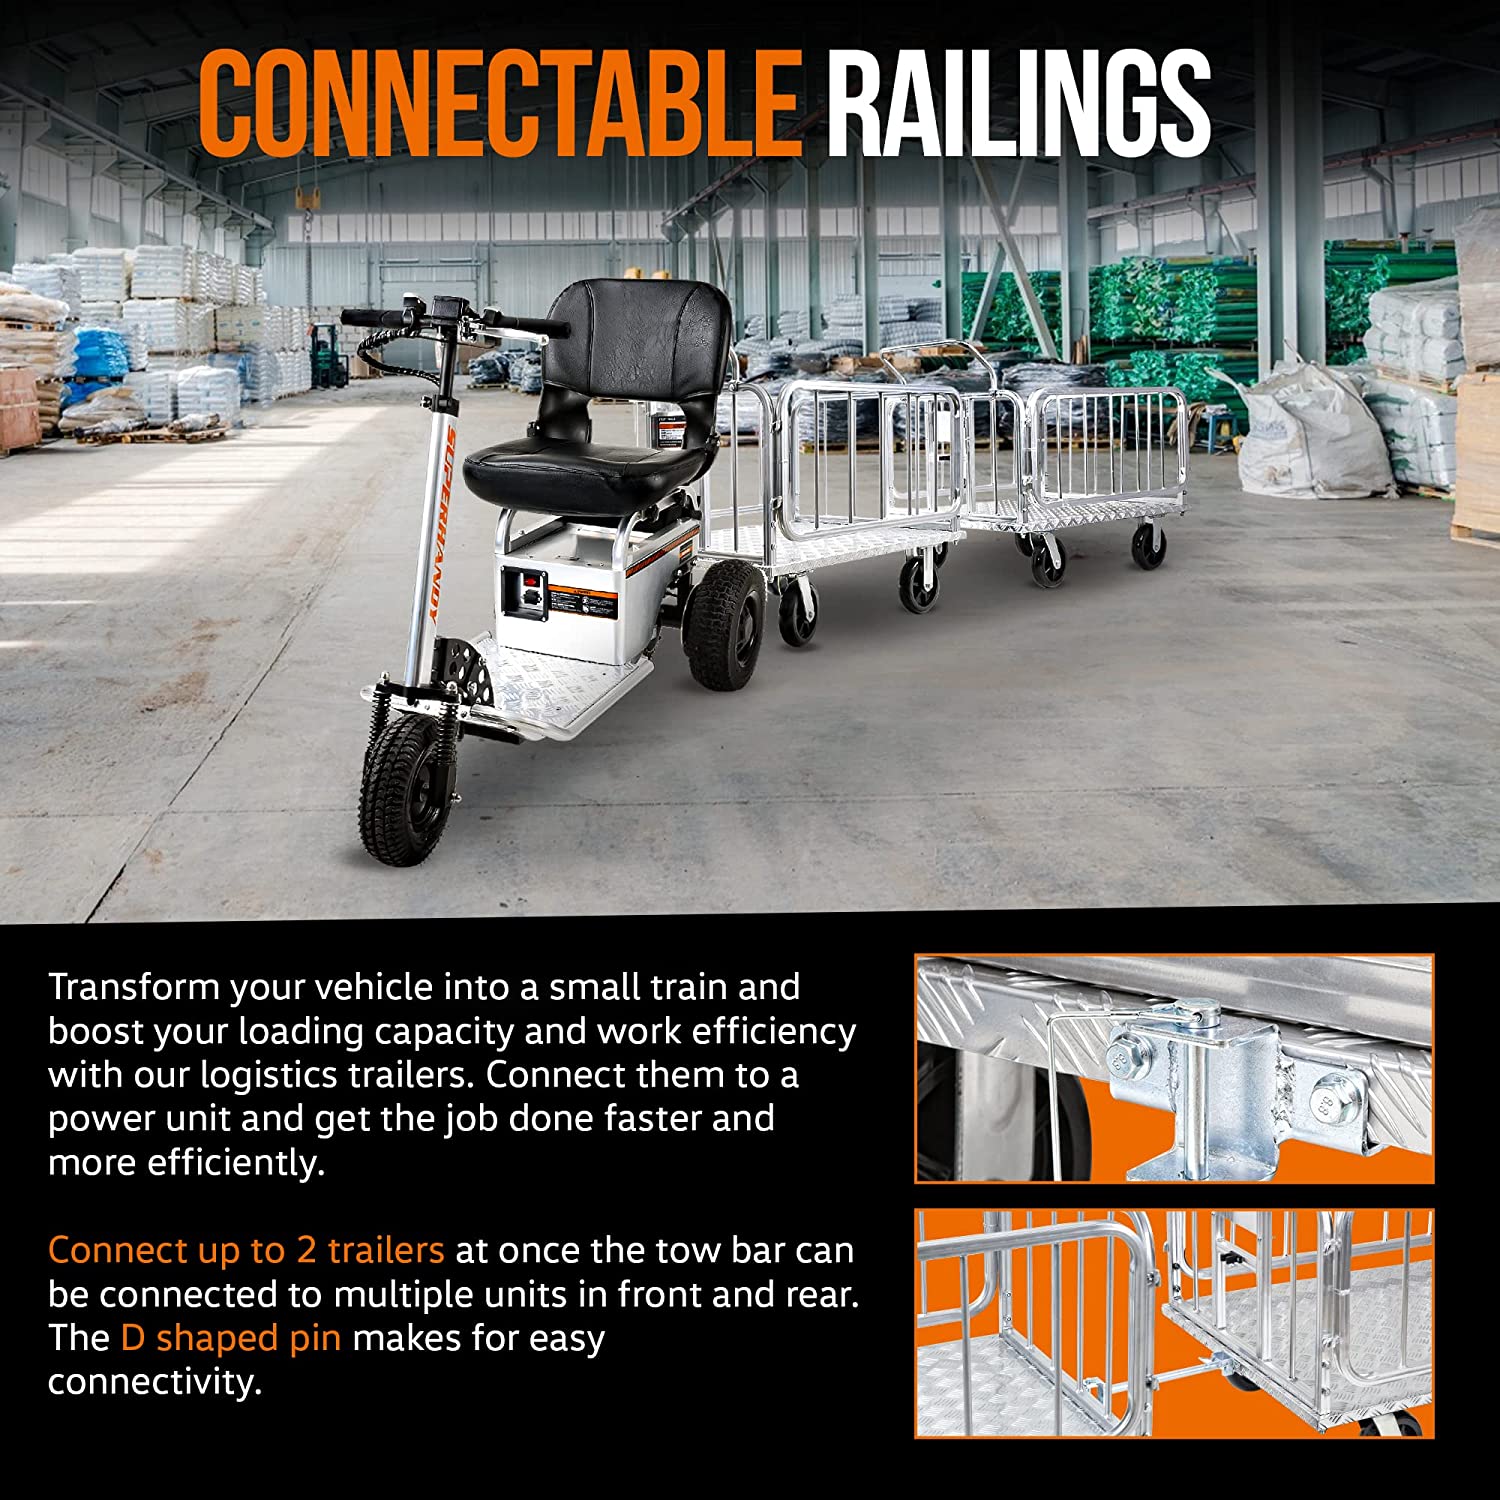 SuperHandy Platform Truck & Trailer - 1200Lb Capacity, Connects Directly to Utility Tugger